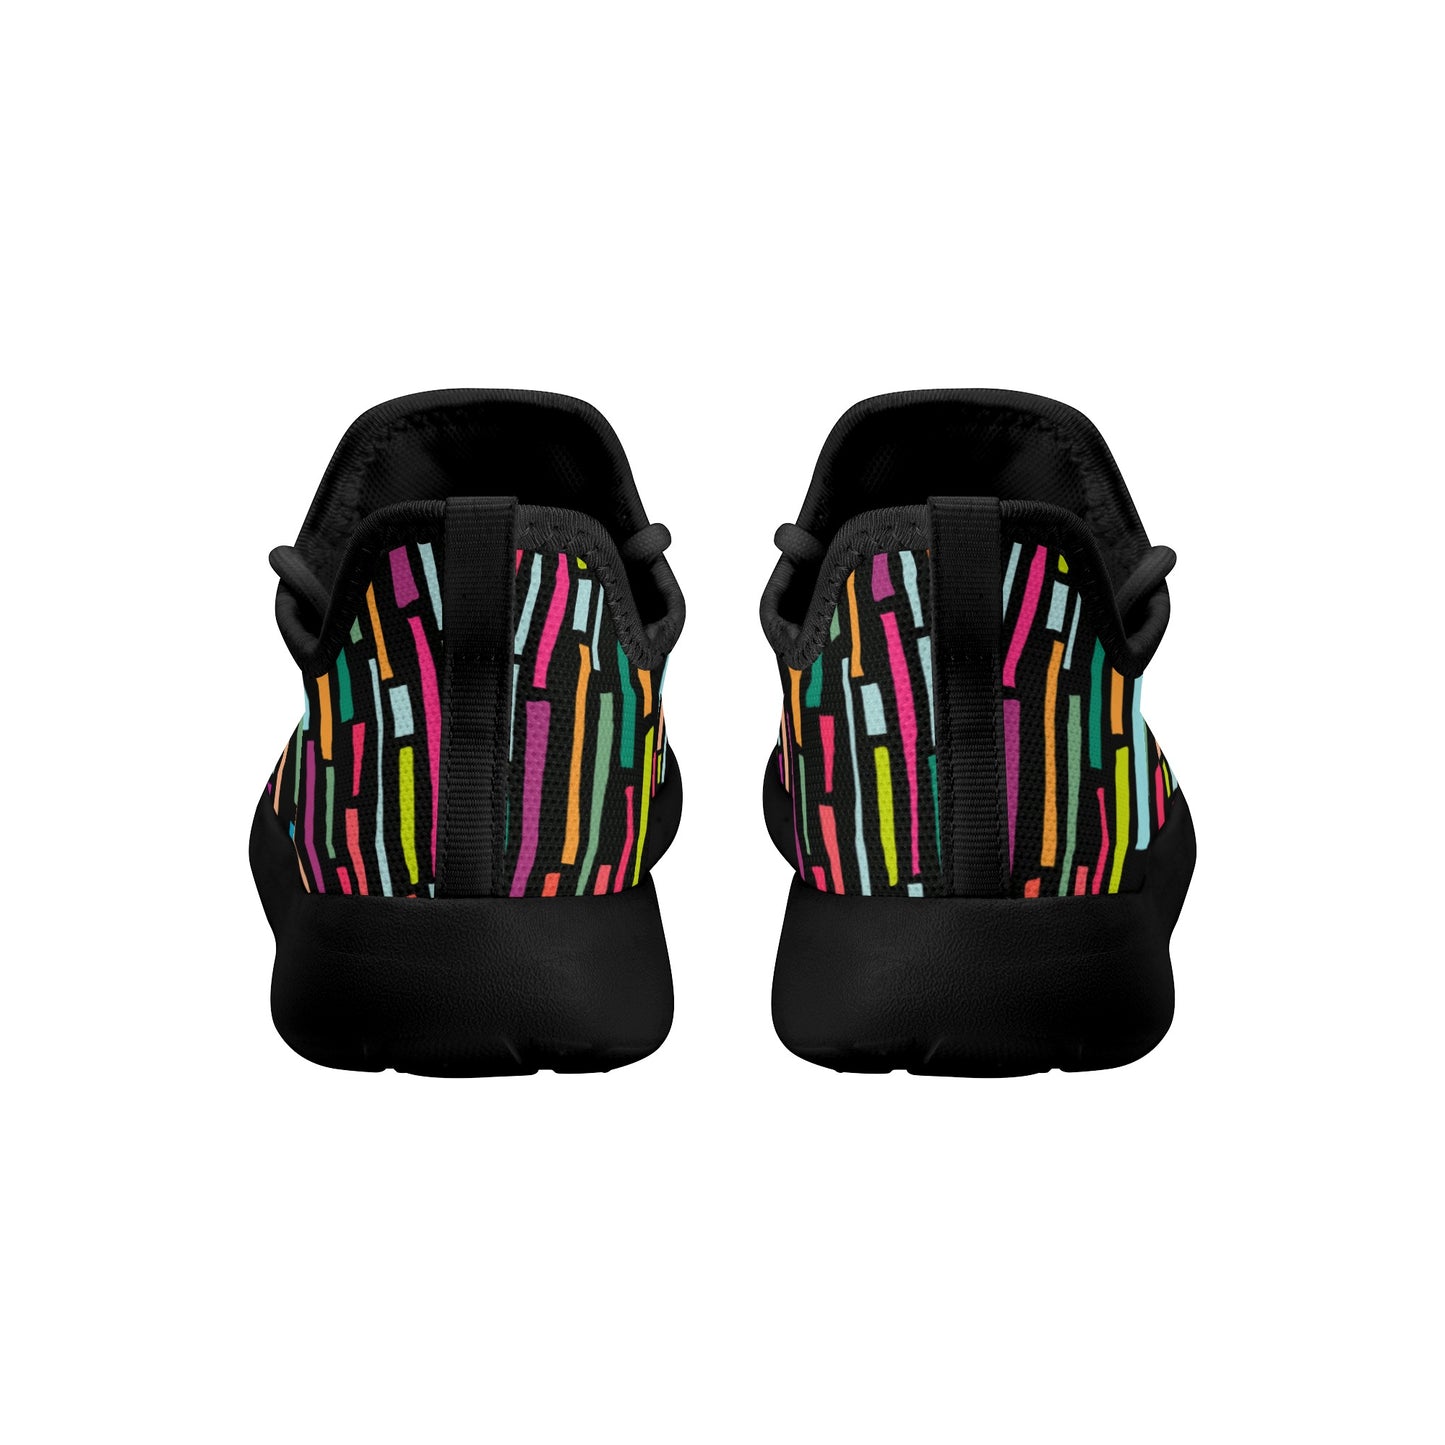 Inverted Lines of Color - Kids Mesh Knit Sneakers